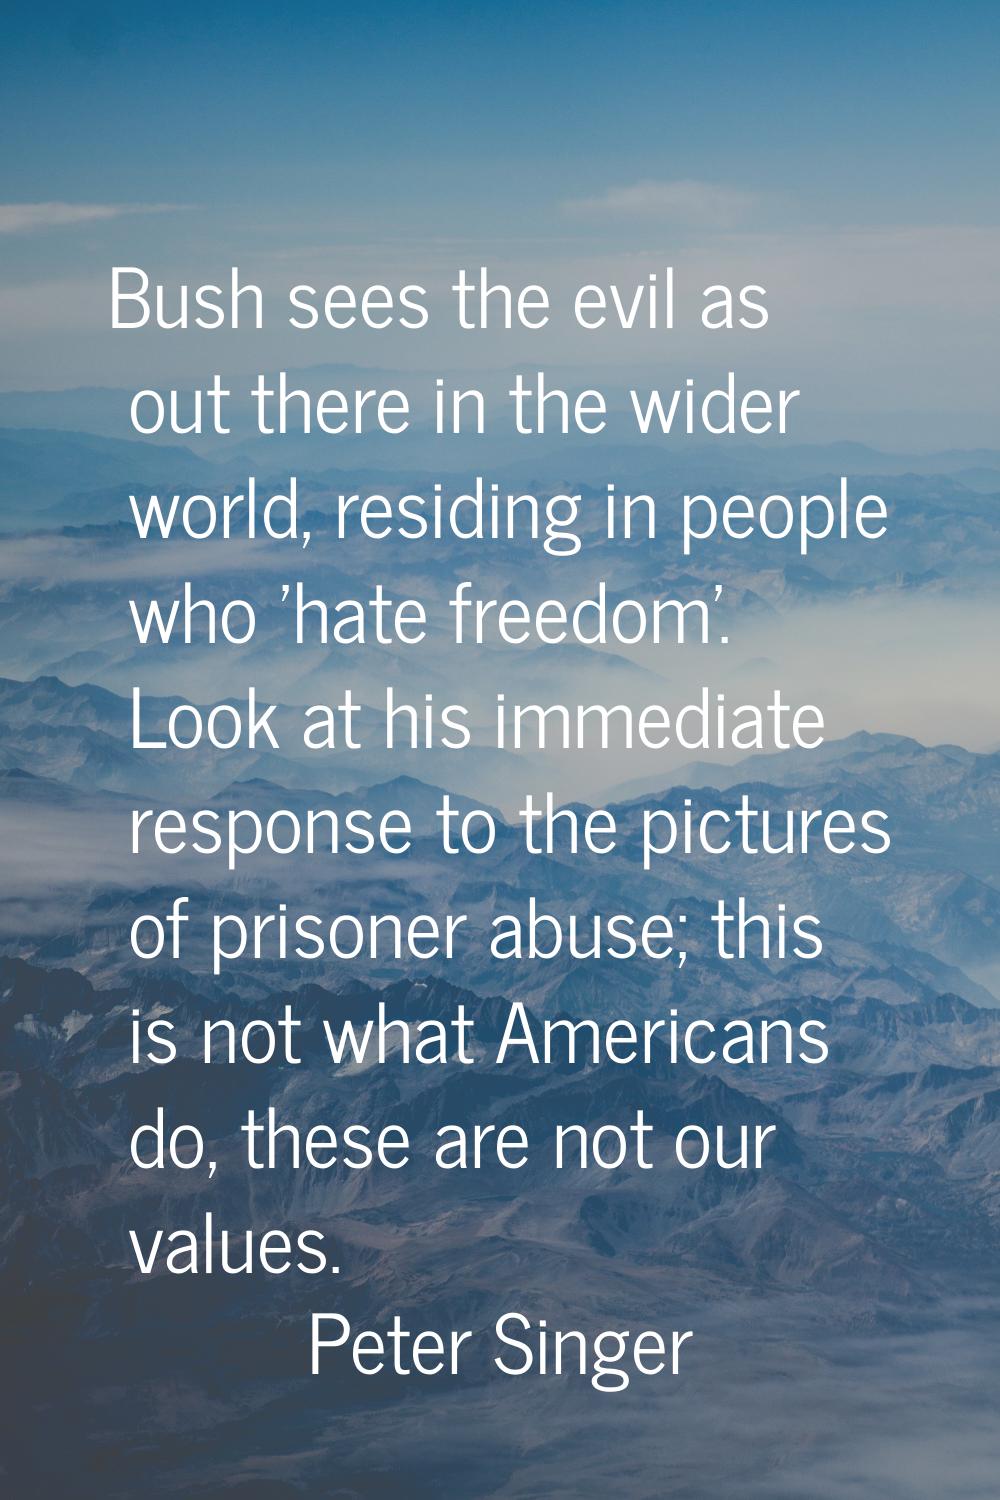 Bush sees the evil as out there in the wider world, residing in people who 'hate freedom'. Look at 